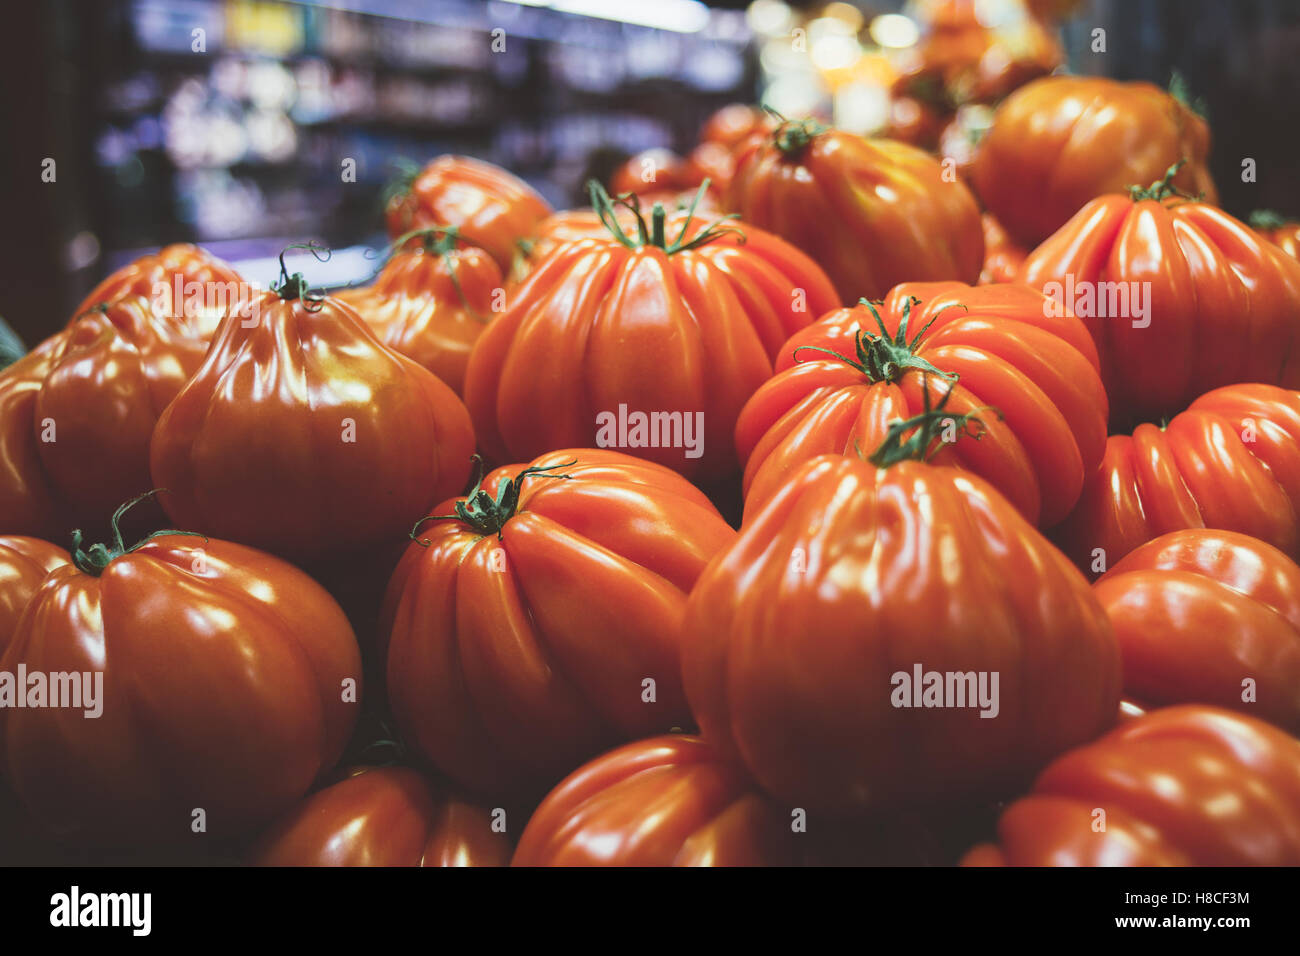 A bunch of tomatoes for sale at an indoor market. Stock Photo